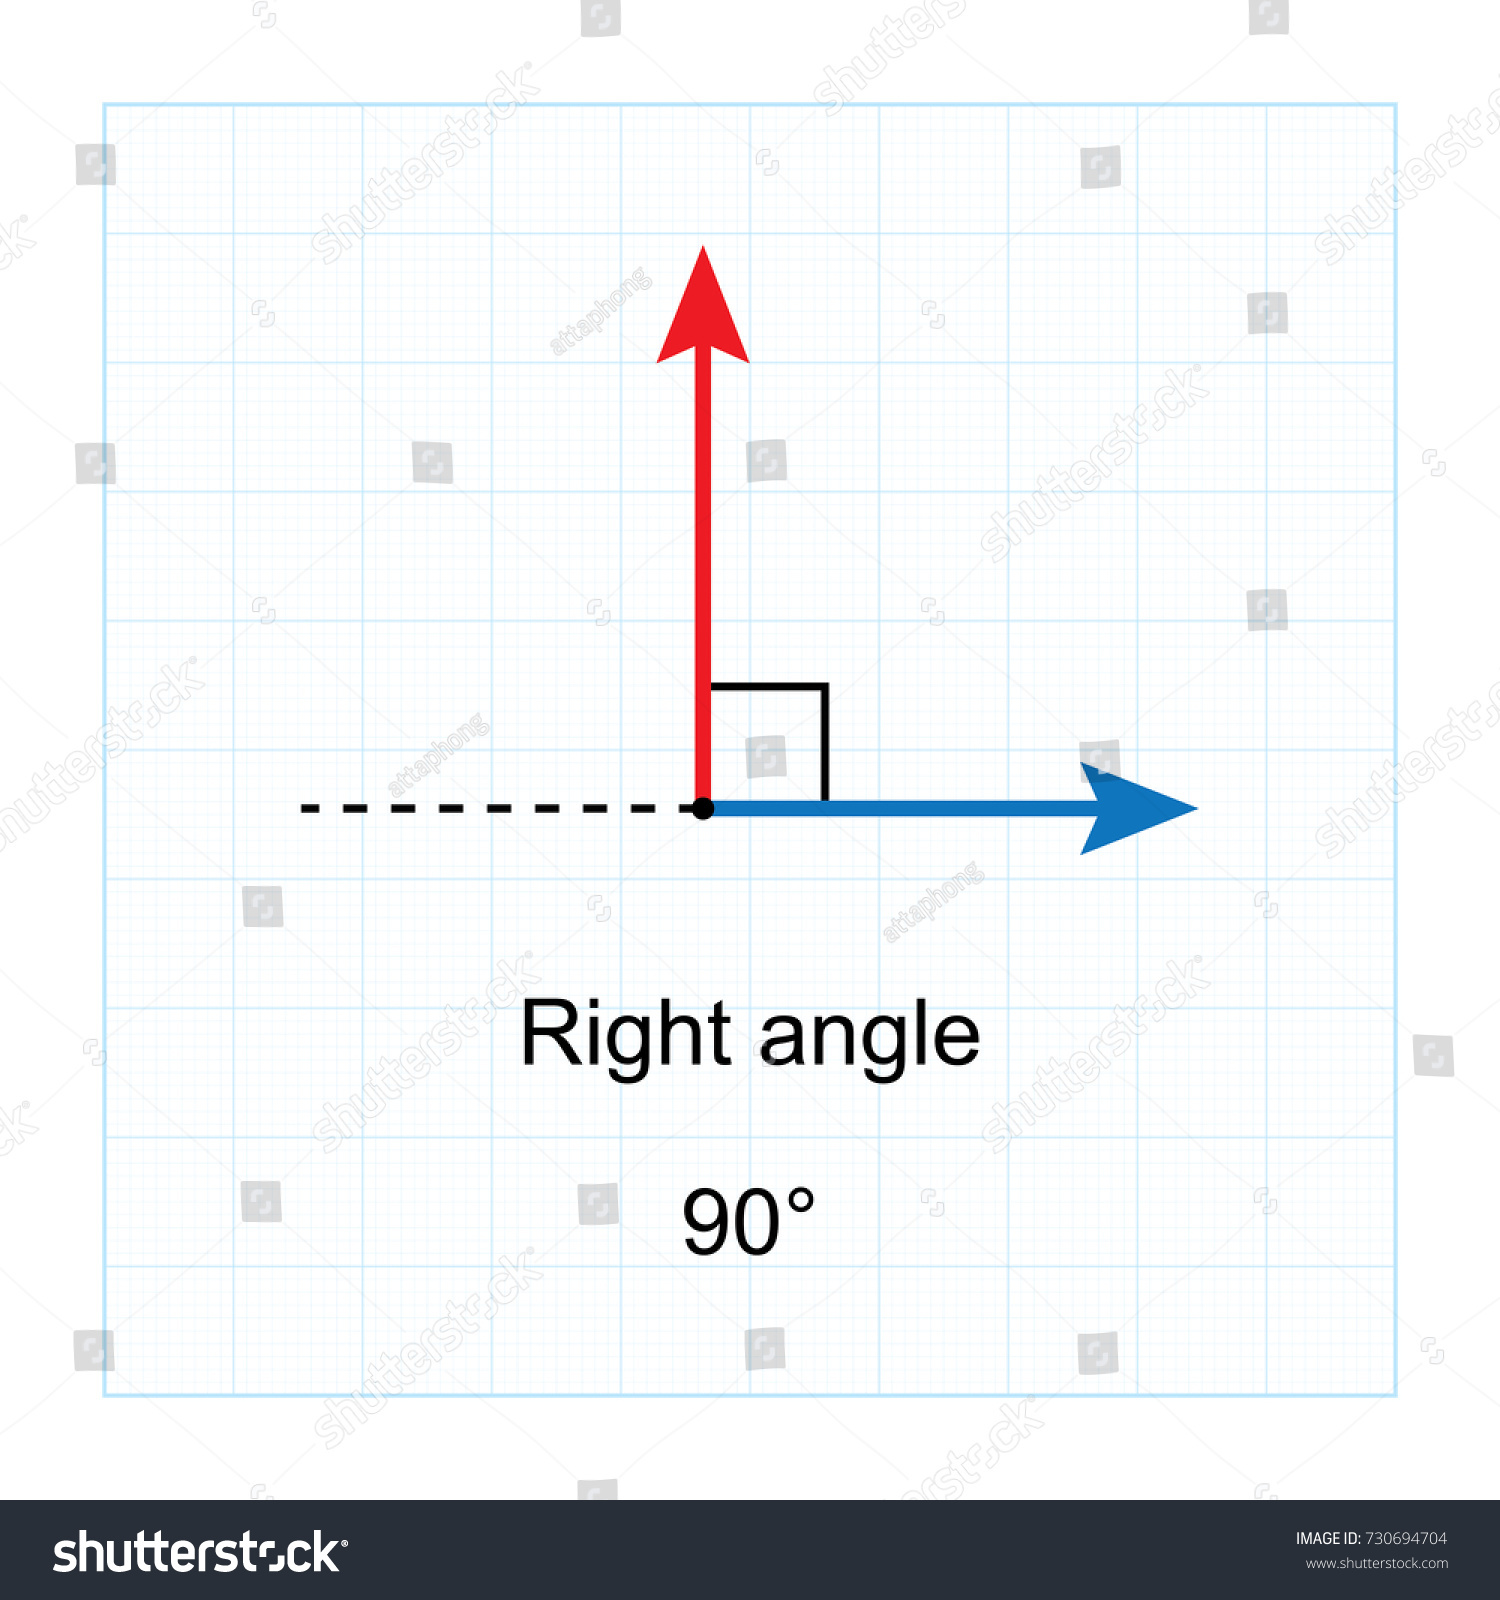 SVG of Types of Angles.  on blue graph background vector illustration
 svg